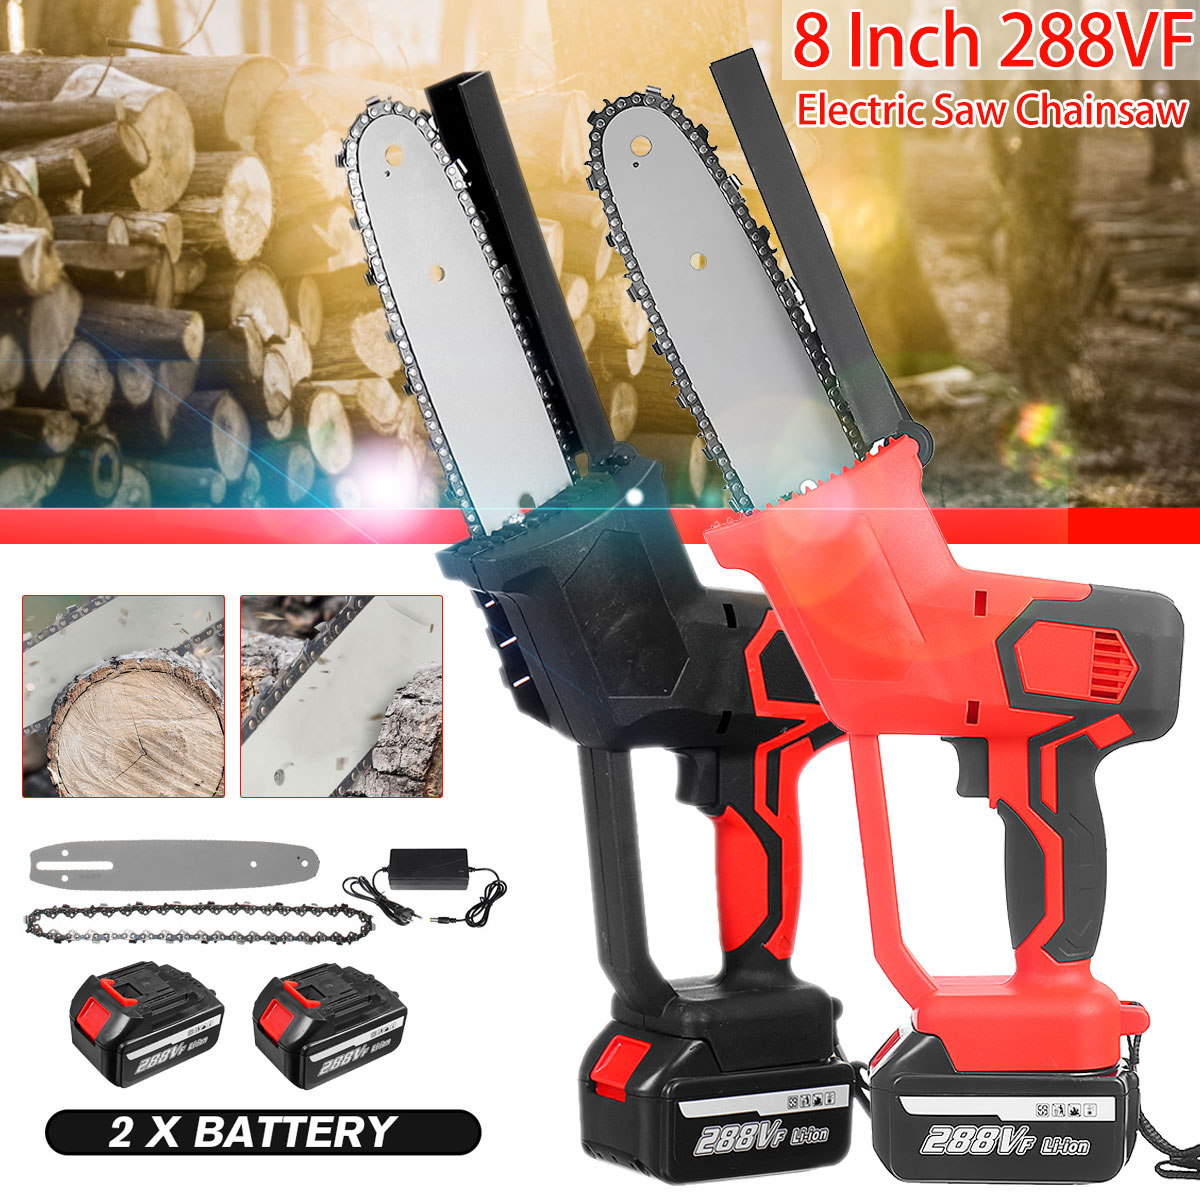 8-Inch-Cordless-Electric-Chain-Saw-288VF--Brushless-Motor-Power-Tools-Chainsaw-1854536-1